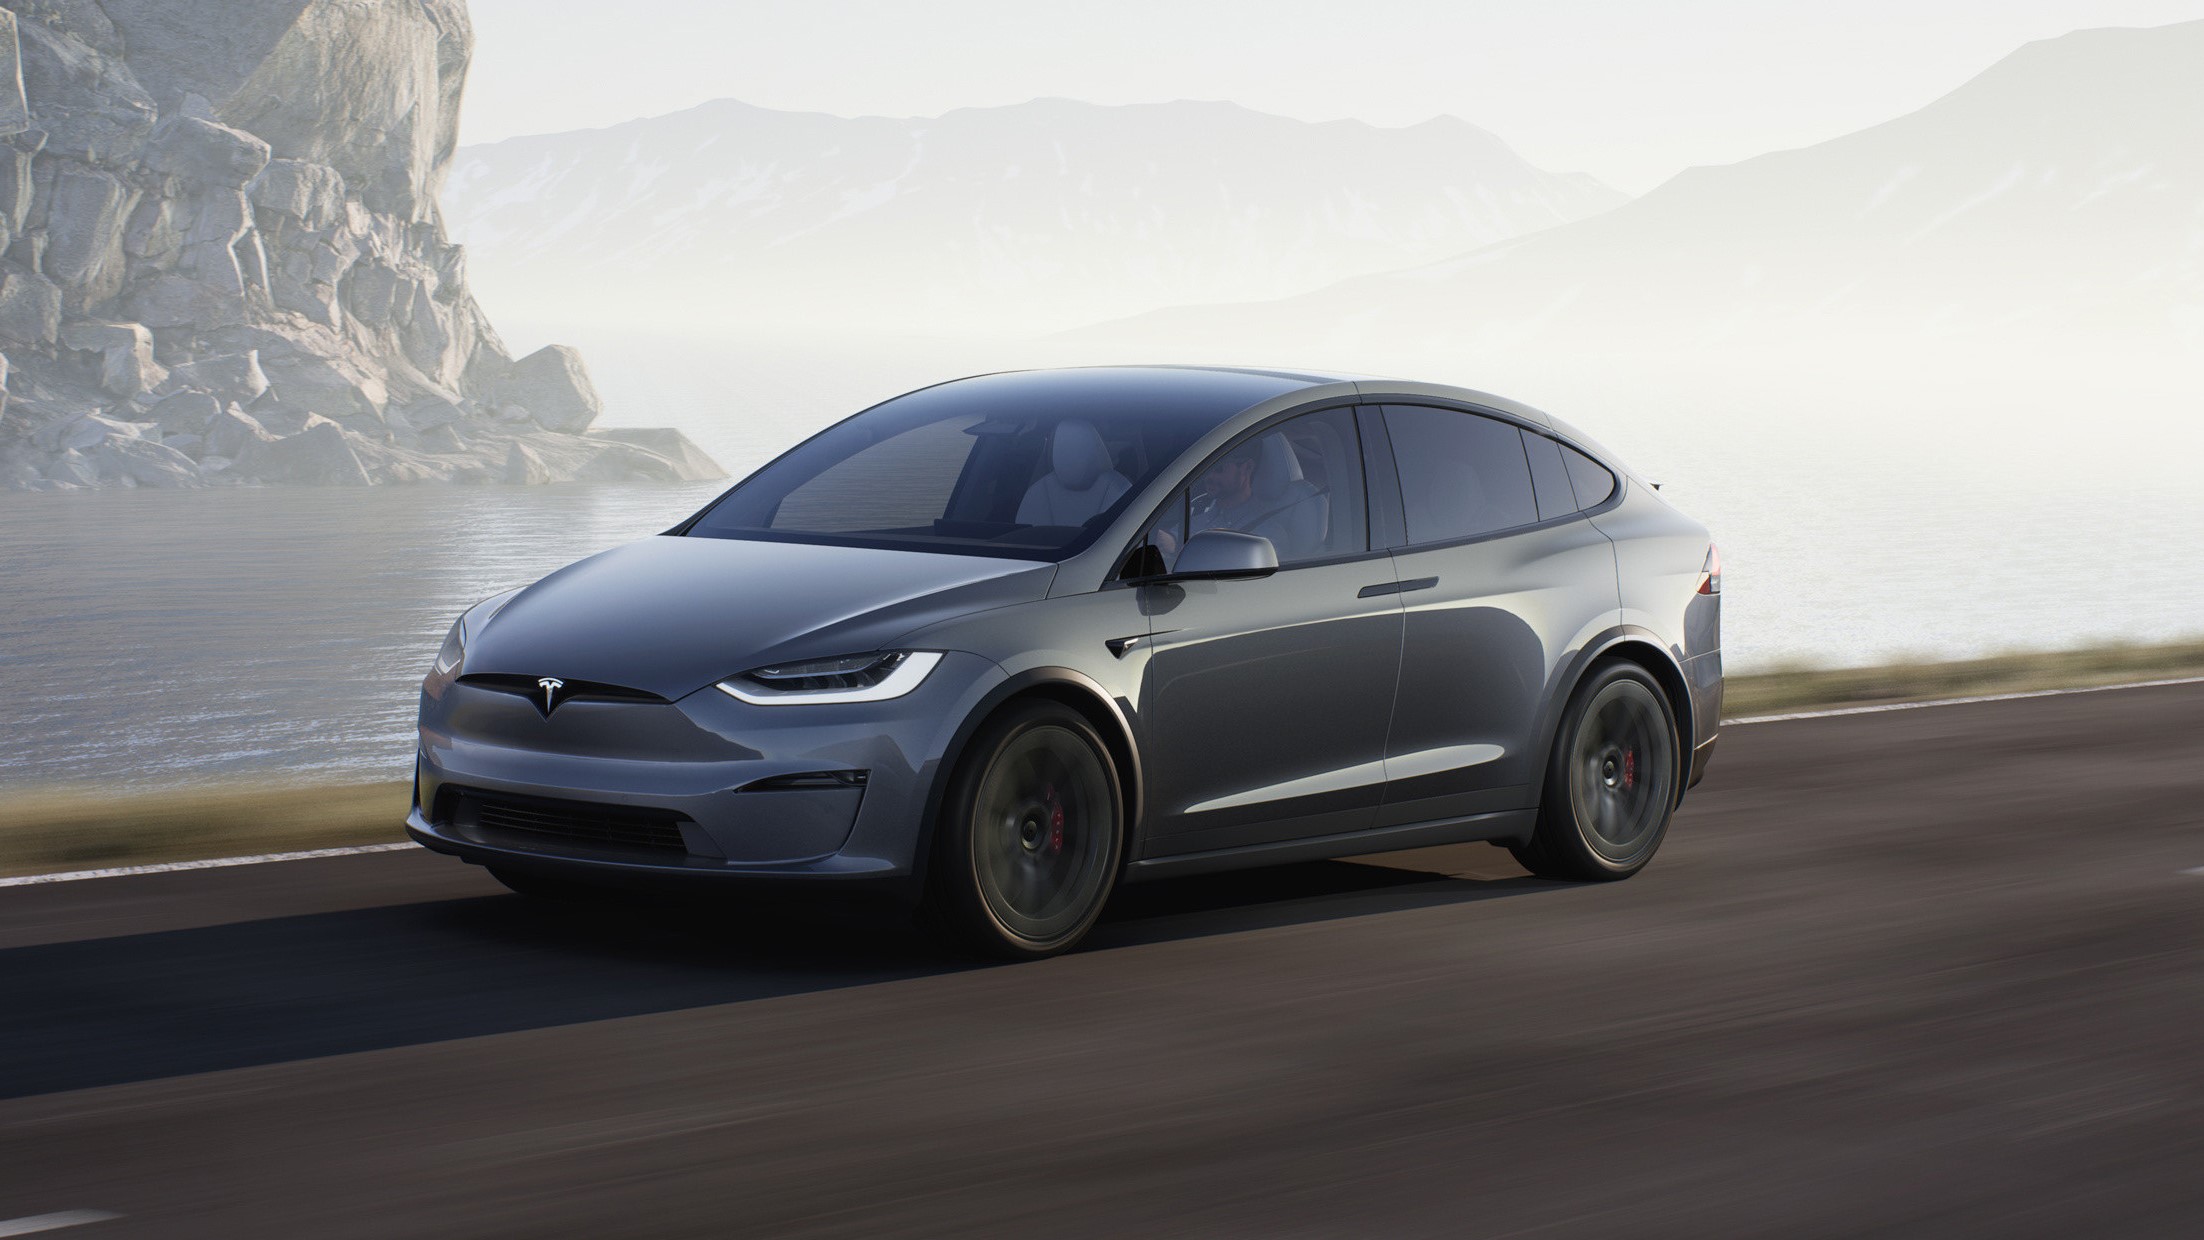 Tesla Model X Plaid: Price, interior, top speed and everything we